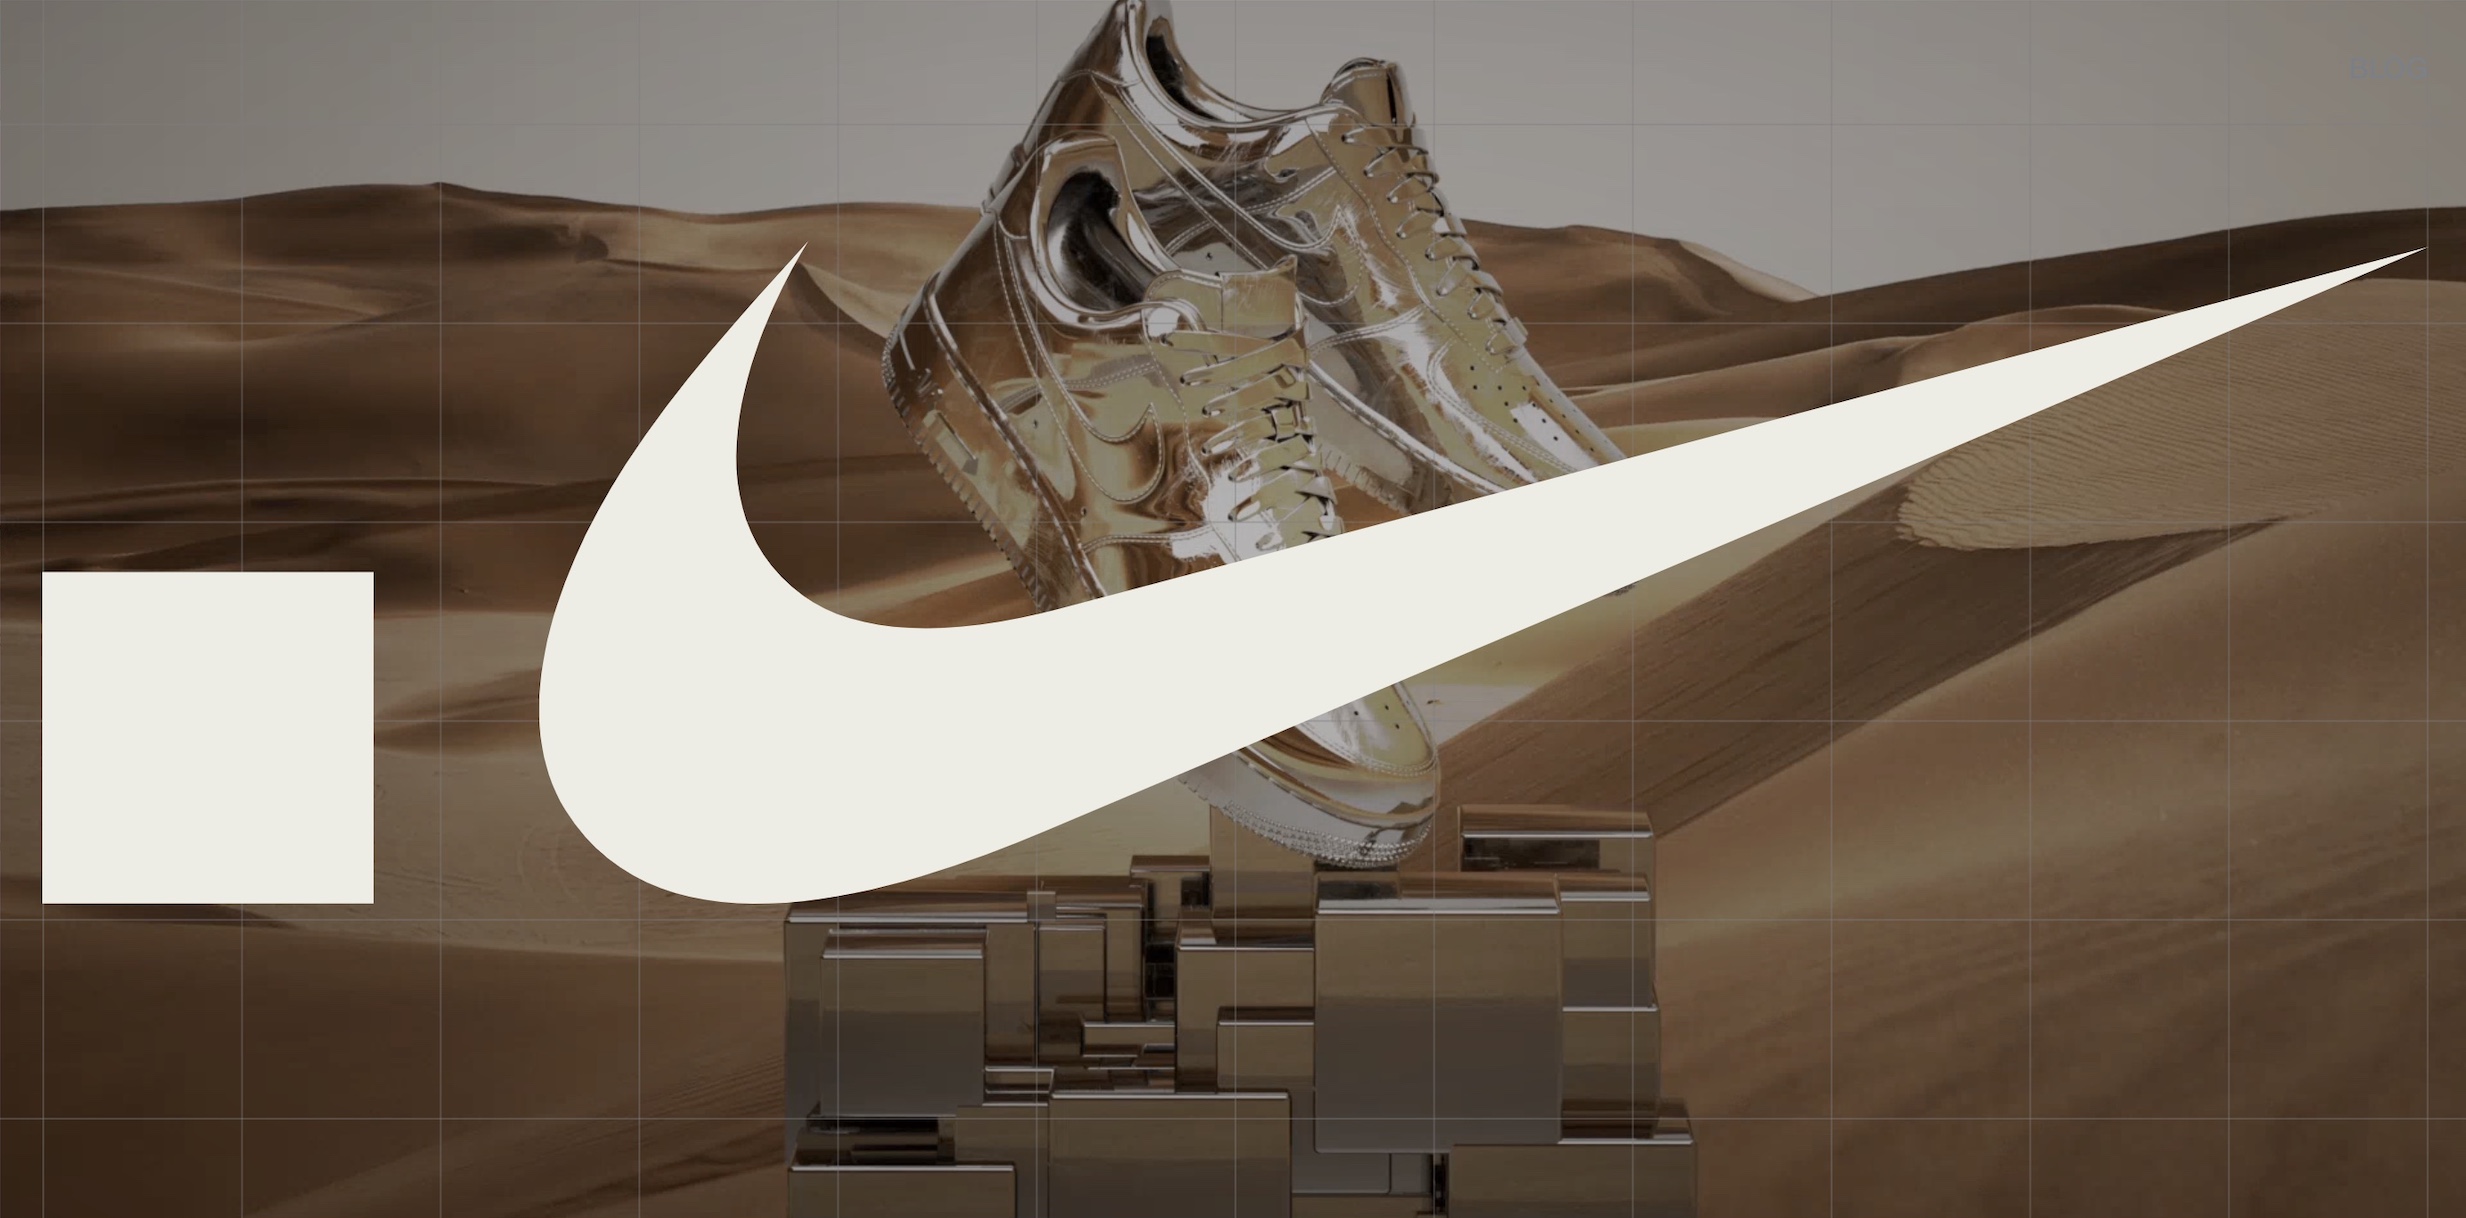 Nike Launches .SWOOSH, Its Official NFT-enabled Web3 Virtual Marketplace -  Blockchain Council